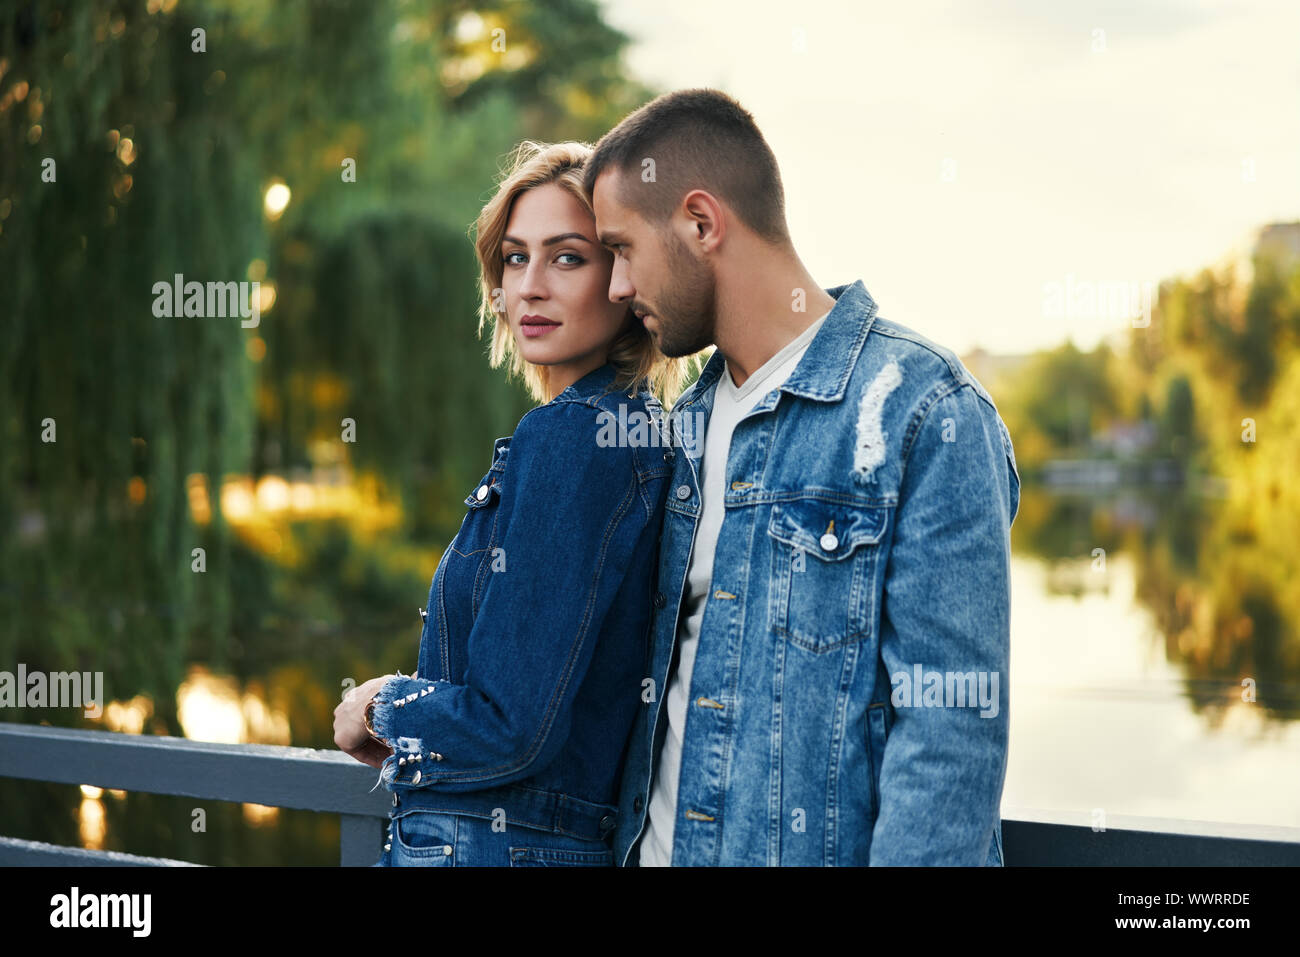 Young beautiful loving couple posing on nature. Love, dating, relationship concept Stock Photo